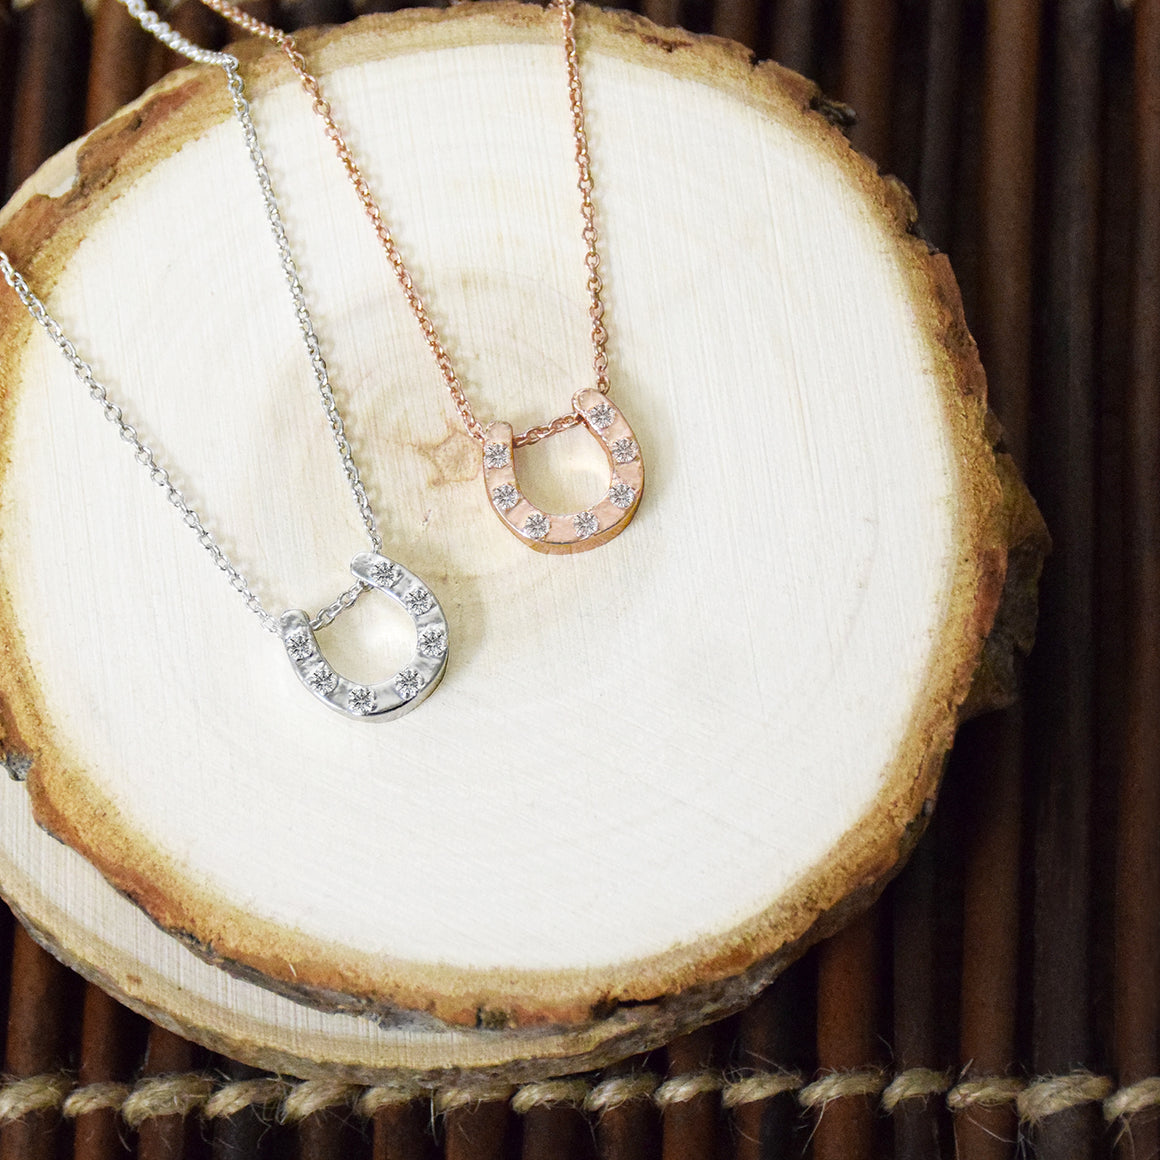 Make Your Own Luck - Dainty Horseshoe Necklace (Rose Gold or Silver)